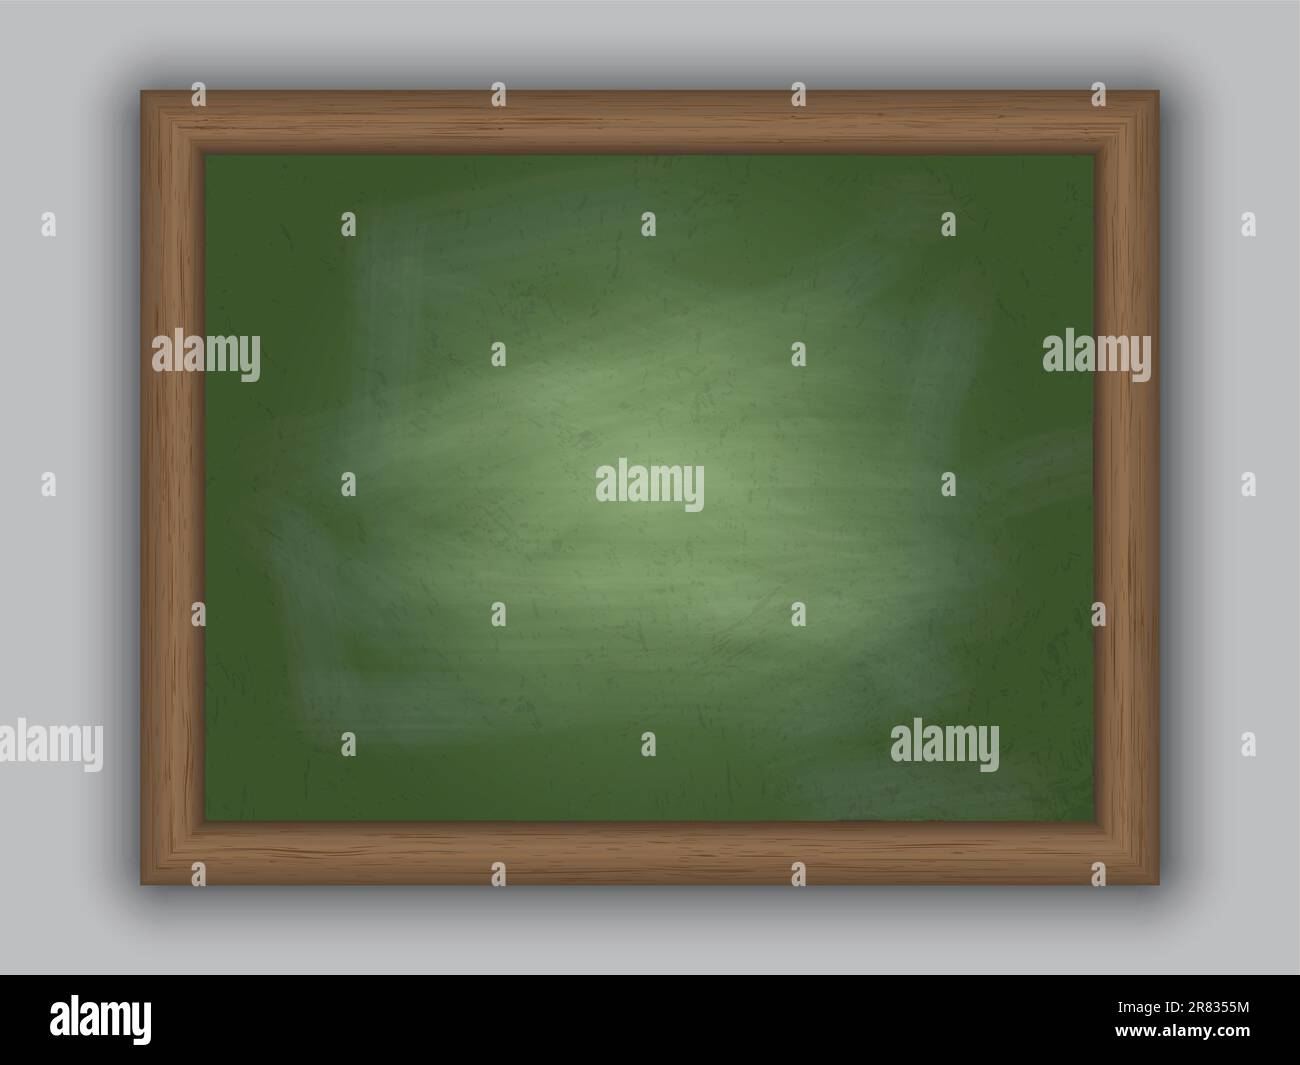 Chalkboard background with a wooden frame Stock Vector